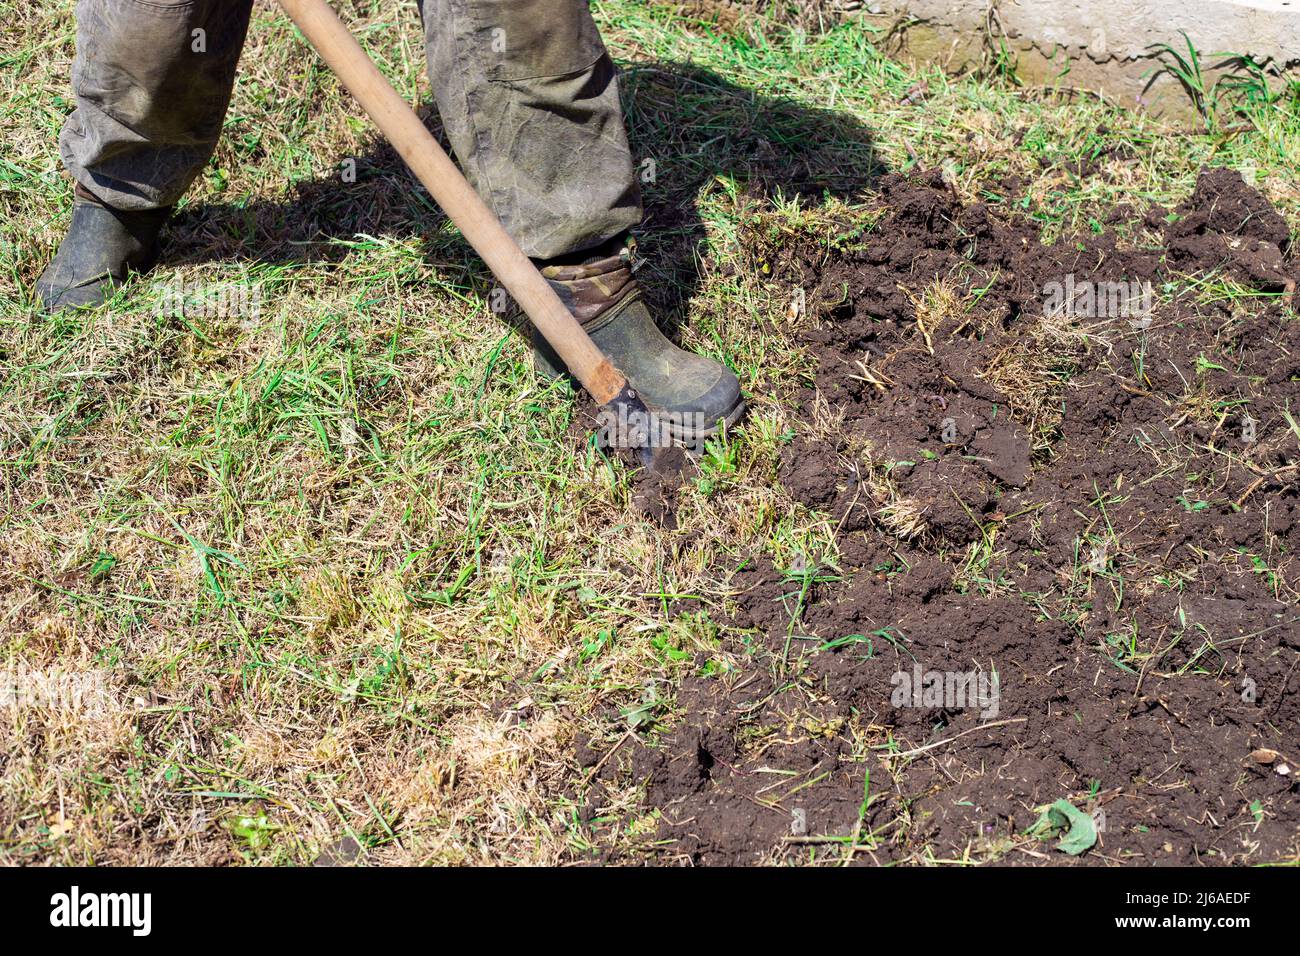 A man is digging a garden with a shovel. Garden work in spring. Planting vegetables and seedlings. Stock Photo